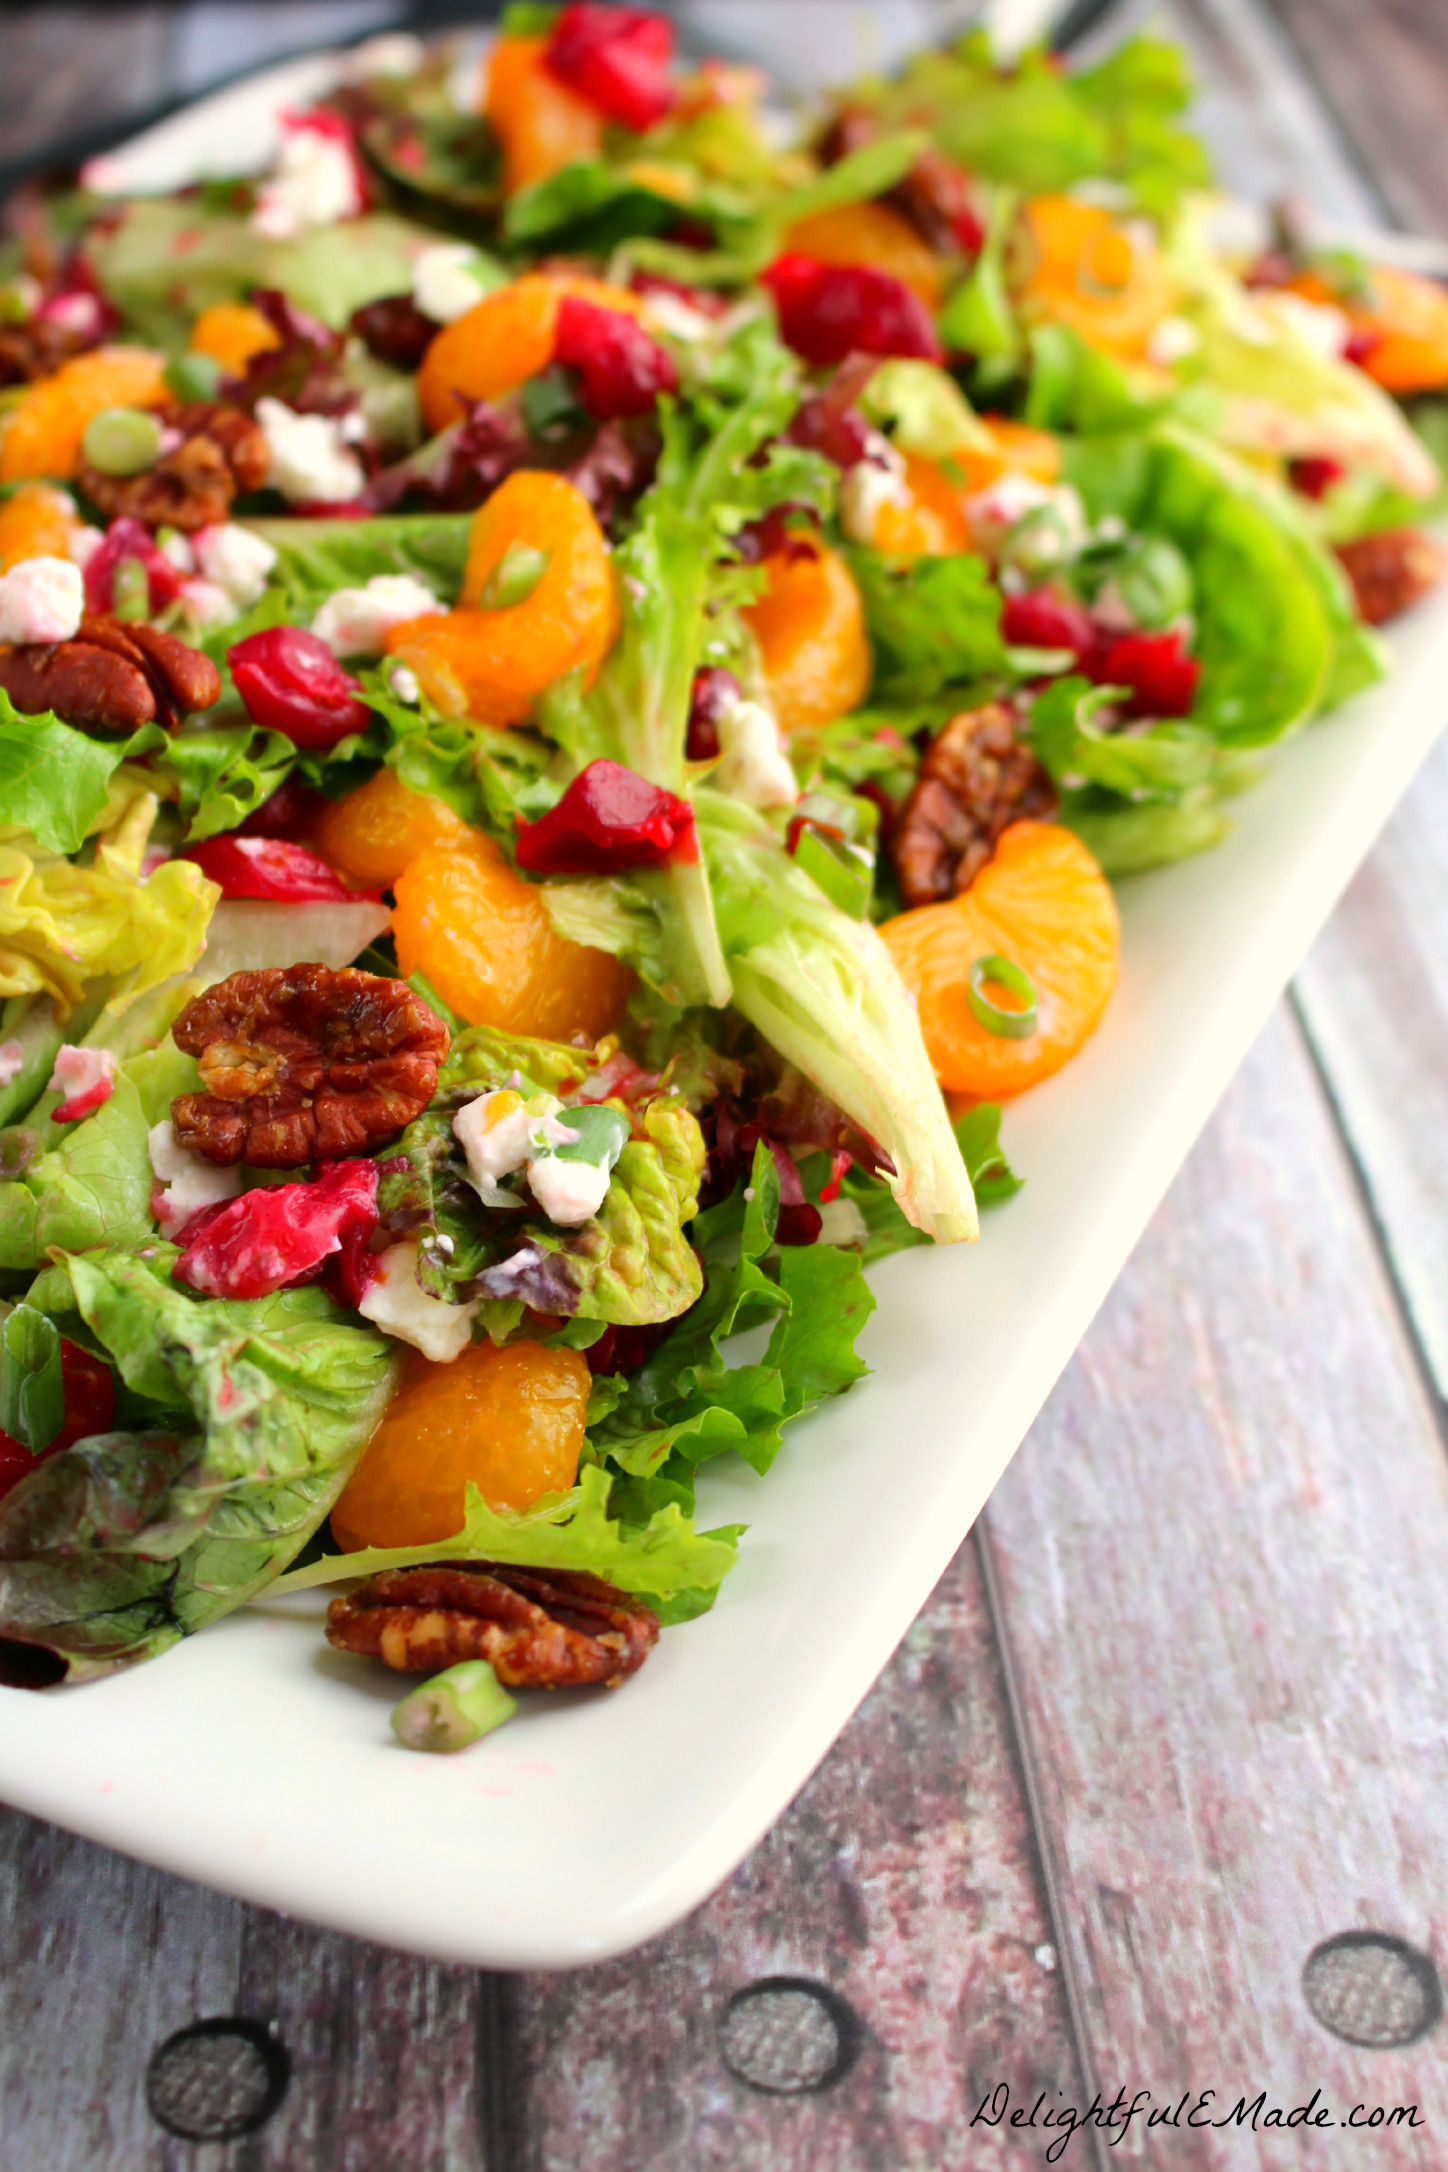 Salads For Christmas
 Cranberry Citrus Salad with Goat Cheese & Pecans